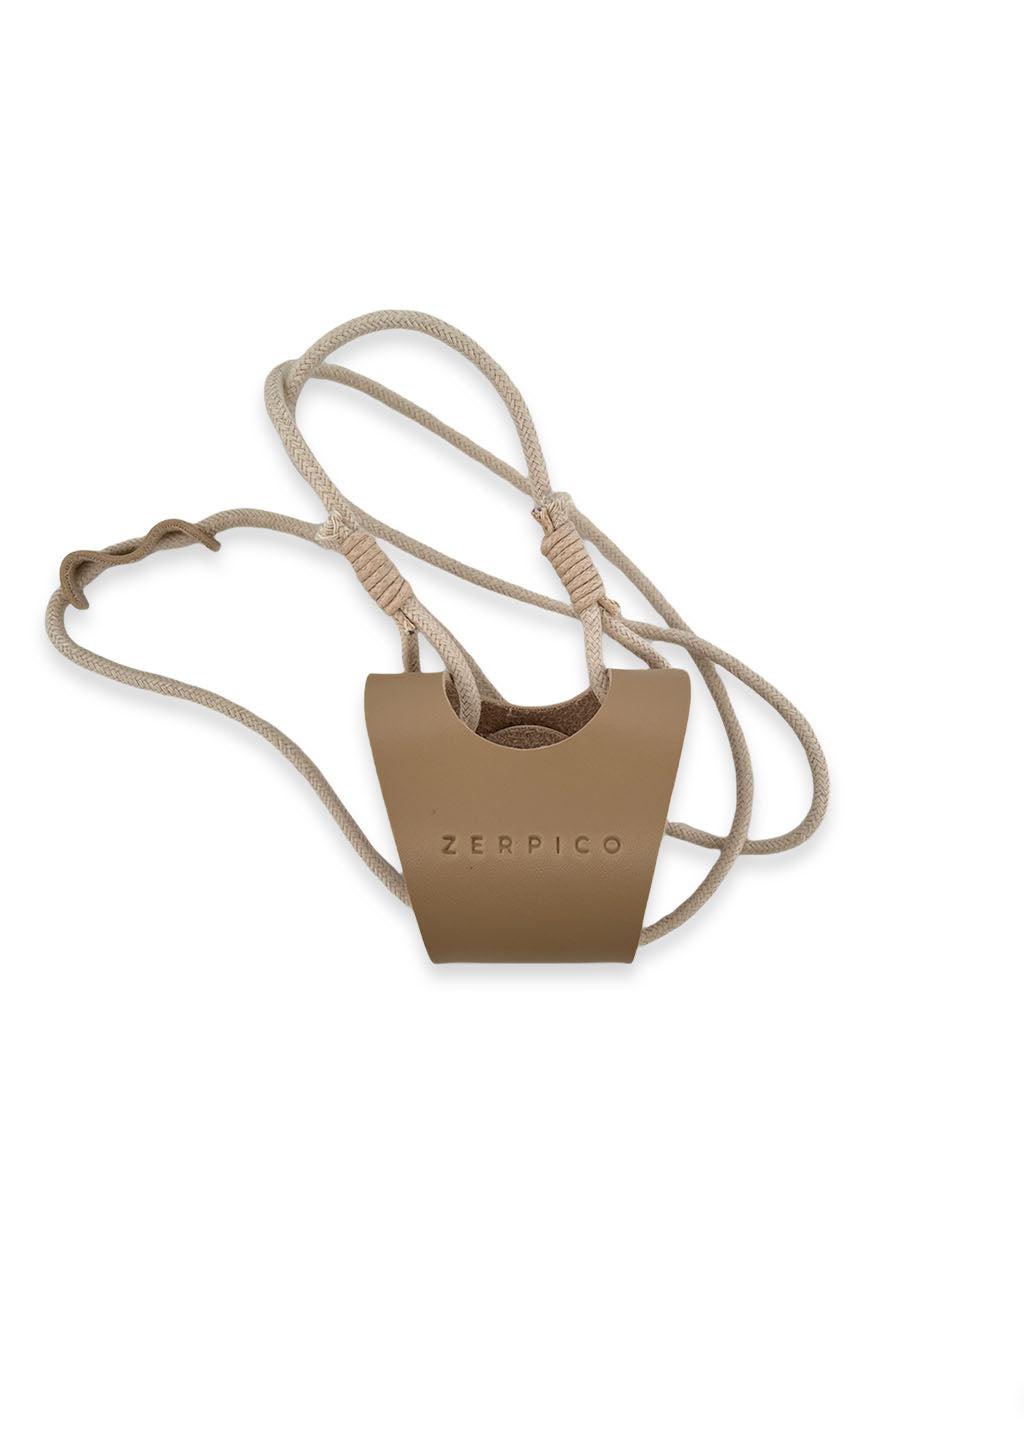 Studio photo of the beige leather sunglasses carrier.